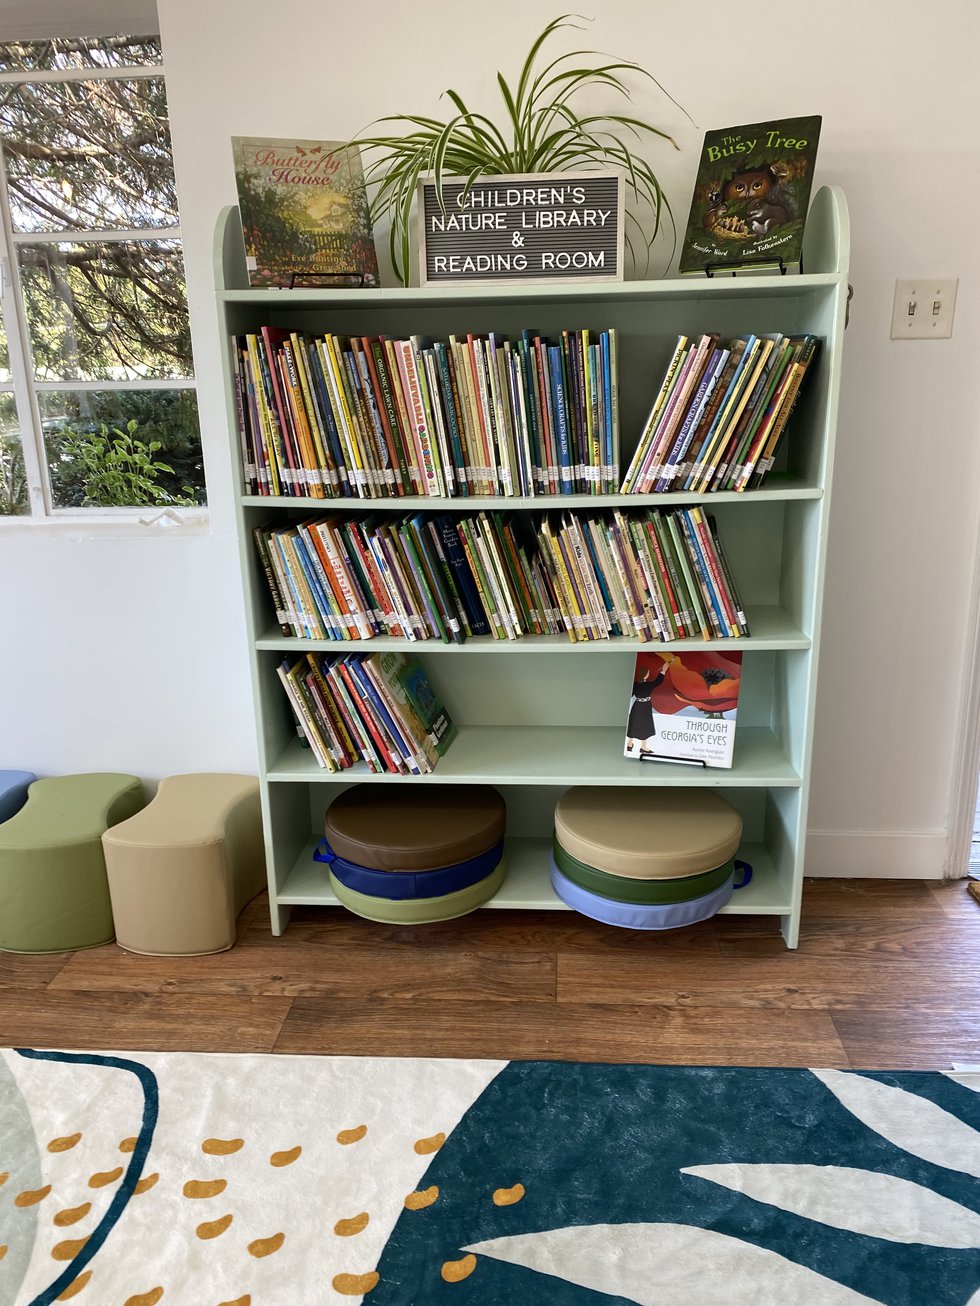 Children's Nature Library and Reading Room 1.jpeg